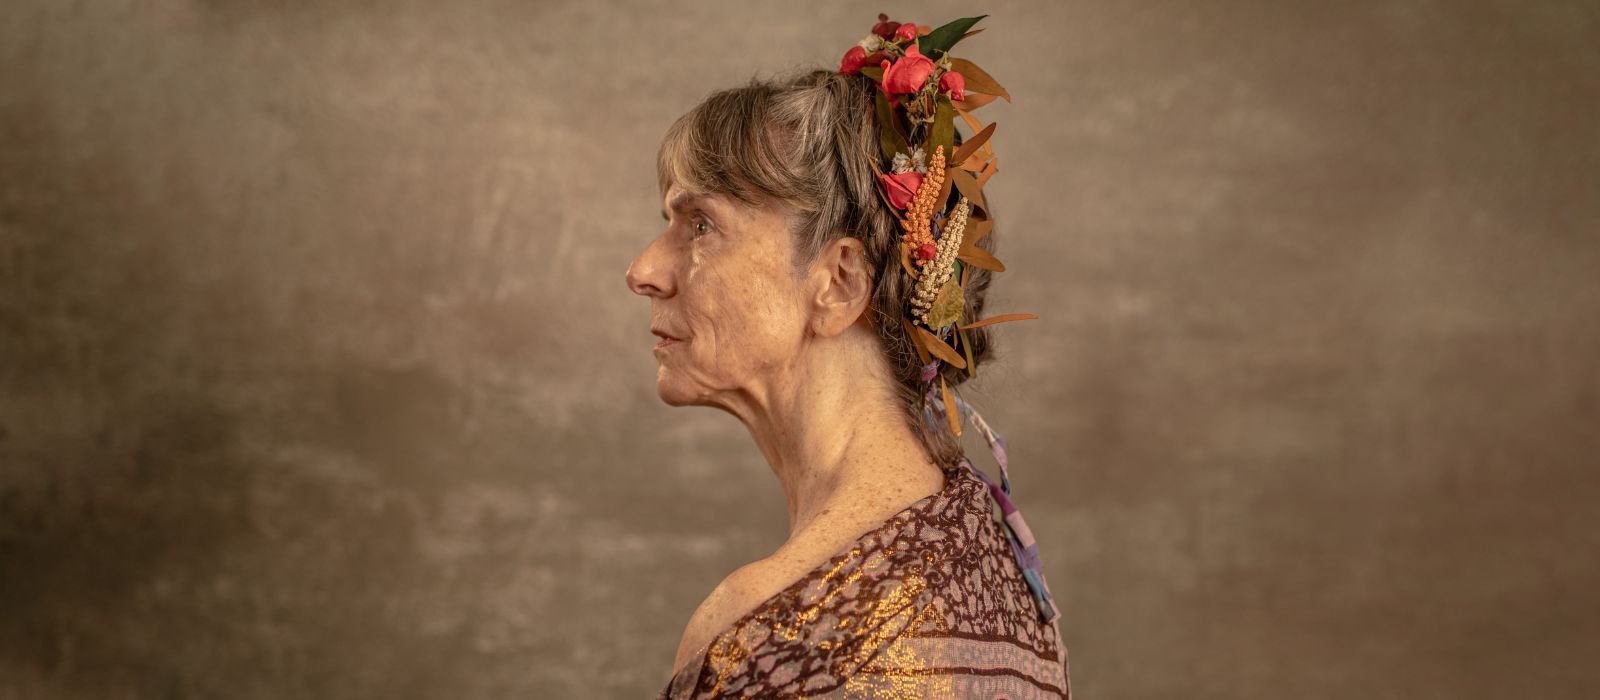 The profile of an older woman, wrapped in a shawl with her hair up in ribbons, against a beige background.